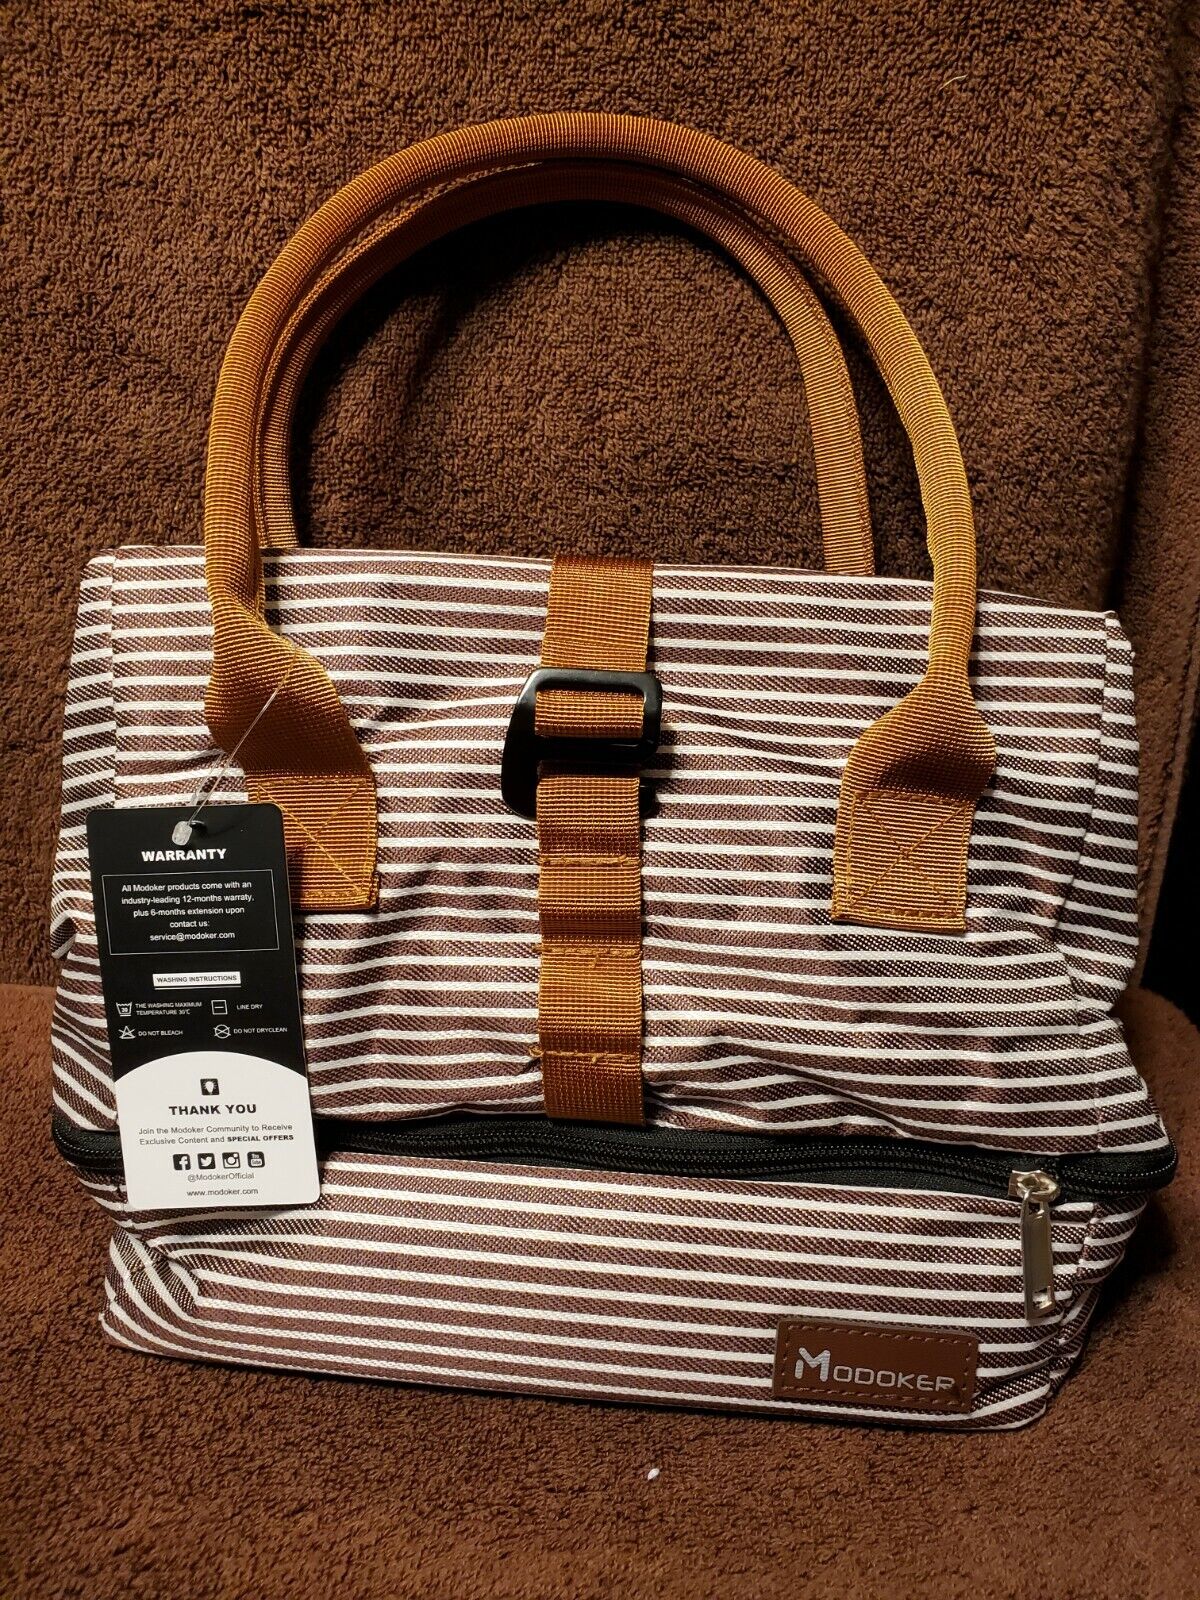 Modoker Expandable Leakproof Fresno Mall Lunch Tote Fashio in Striped Brown Large-scale sale